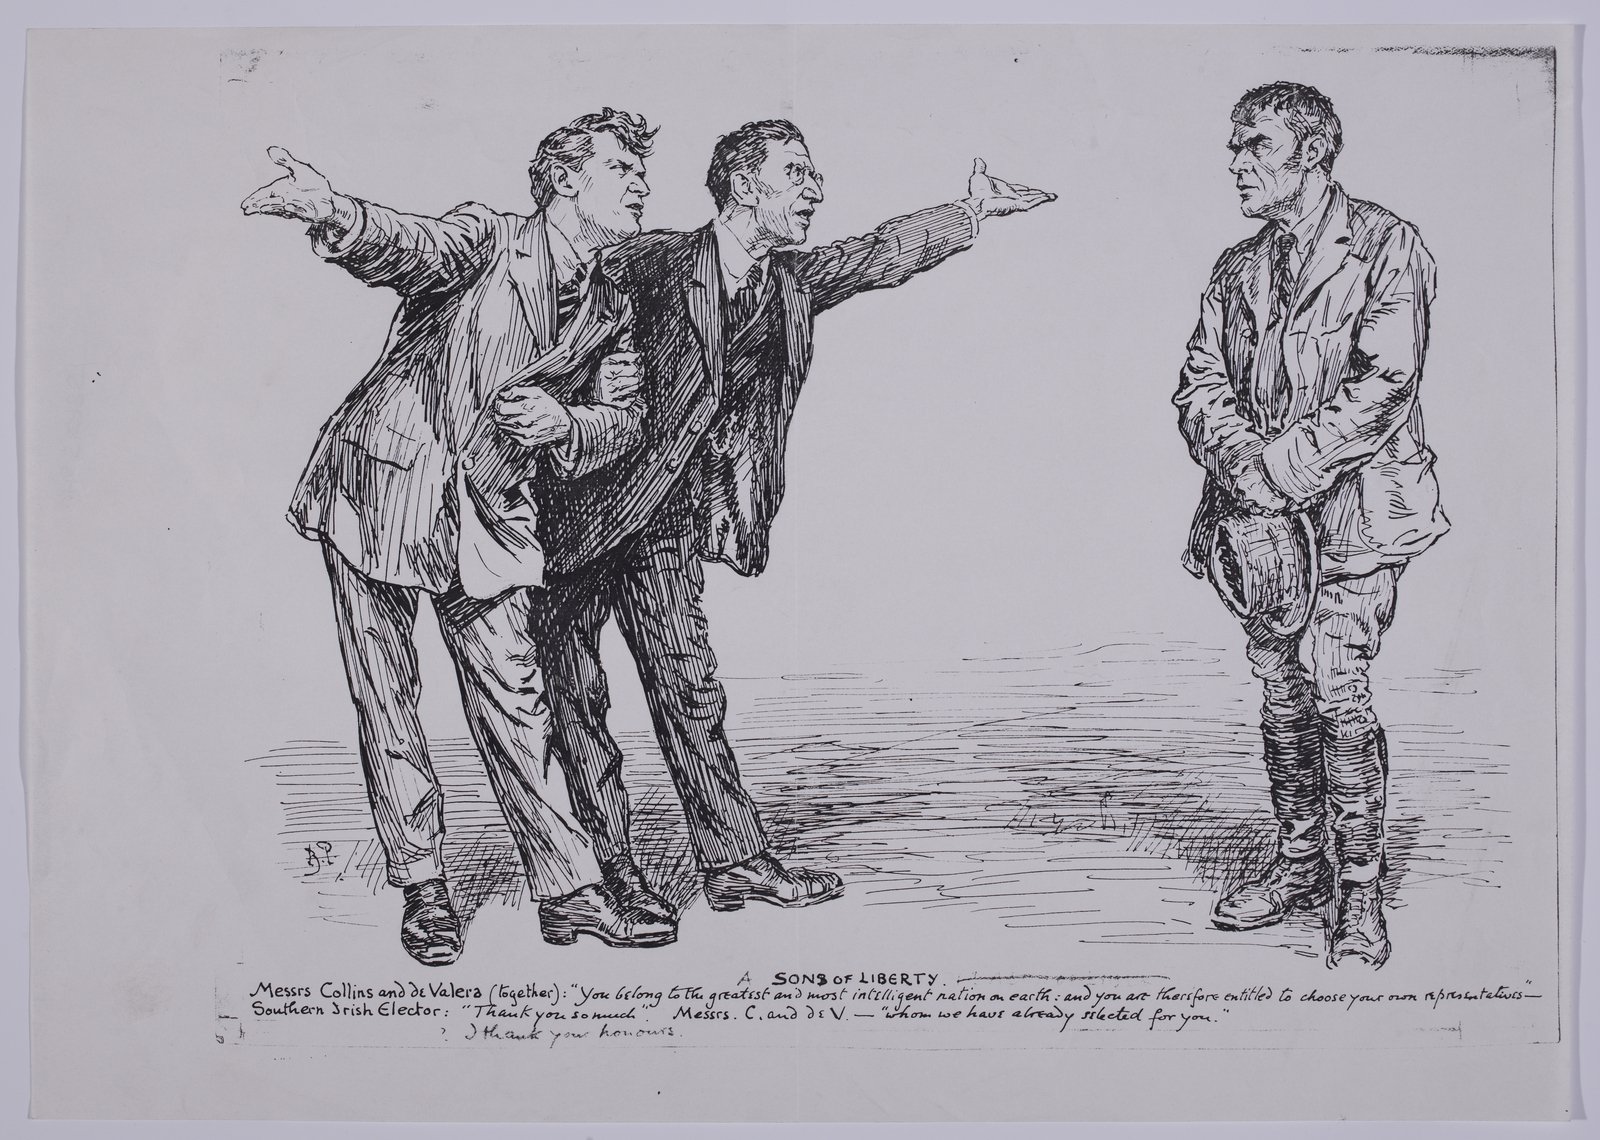 Image - A handbill featuring a reprint of a cartoon by Bernard Partidge [B.P] that originally appeared in 'Punch' magazine in May 1922 mocking the Pact Election. This pact confirmed British suspicions of Collins. Image courtesy of the National Library of Ireland